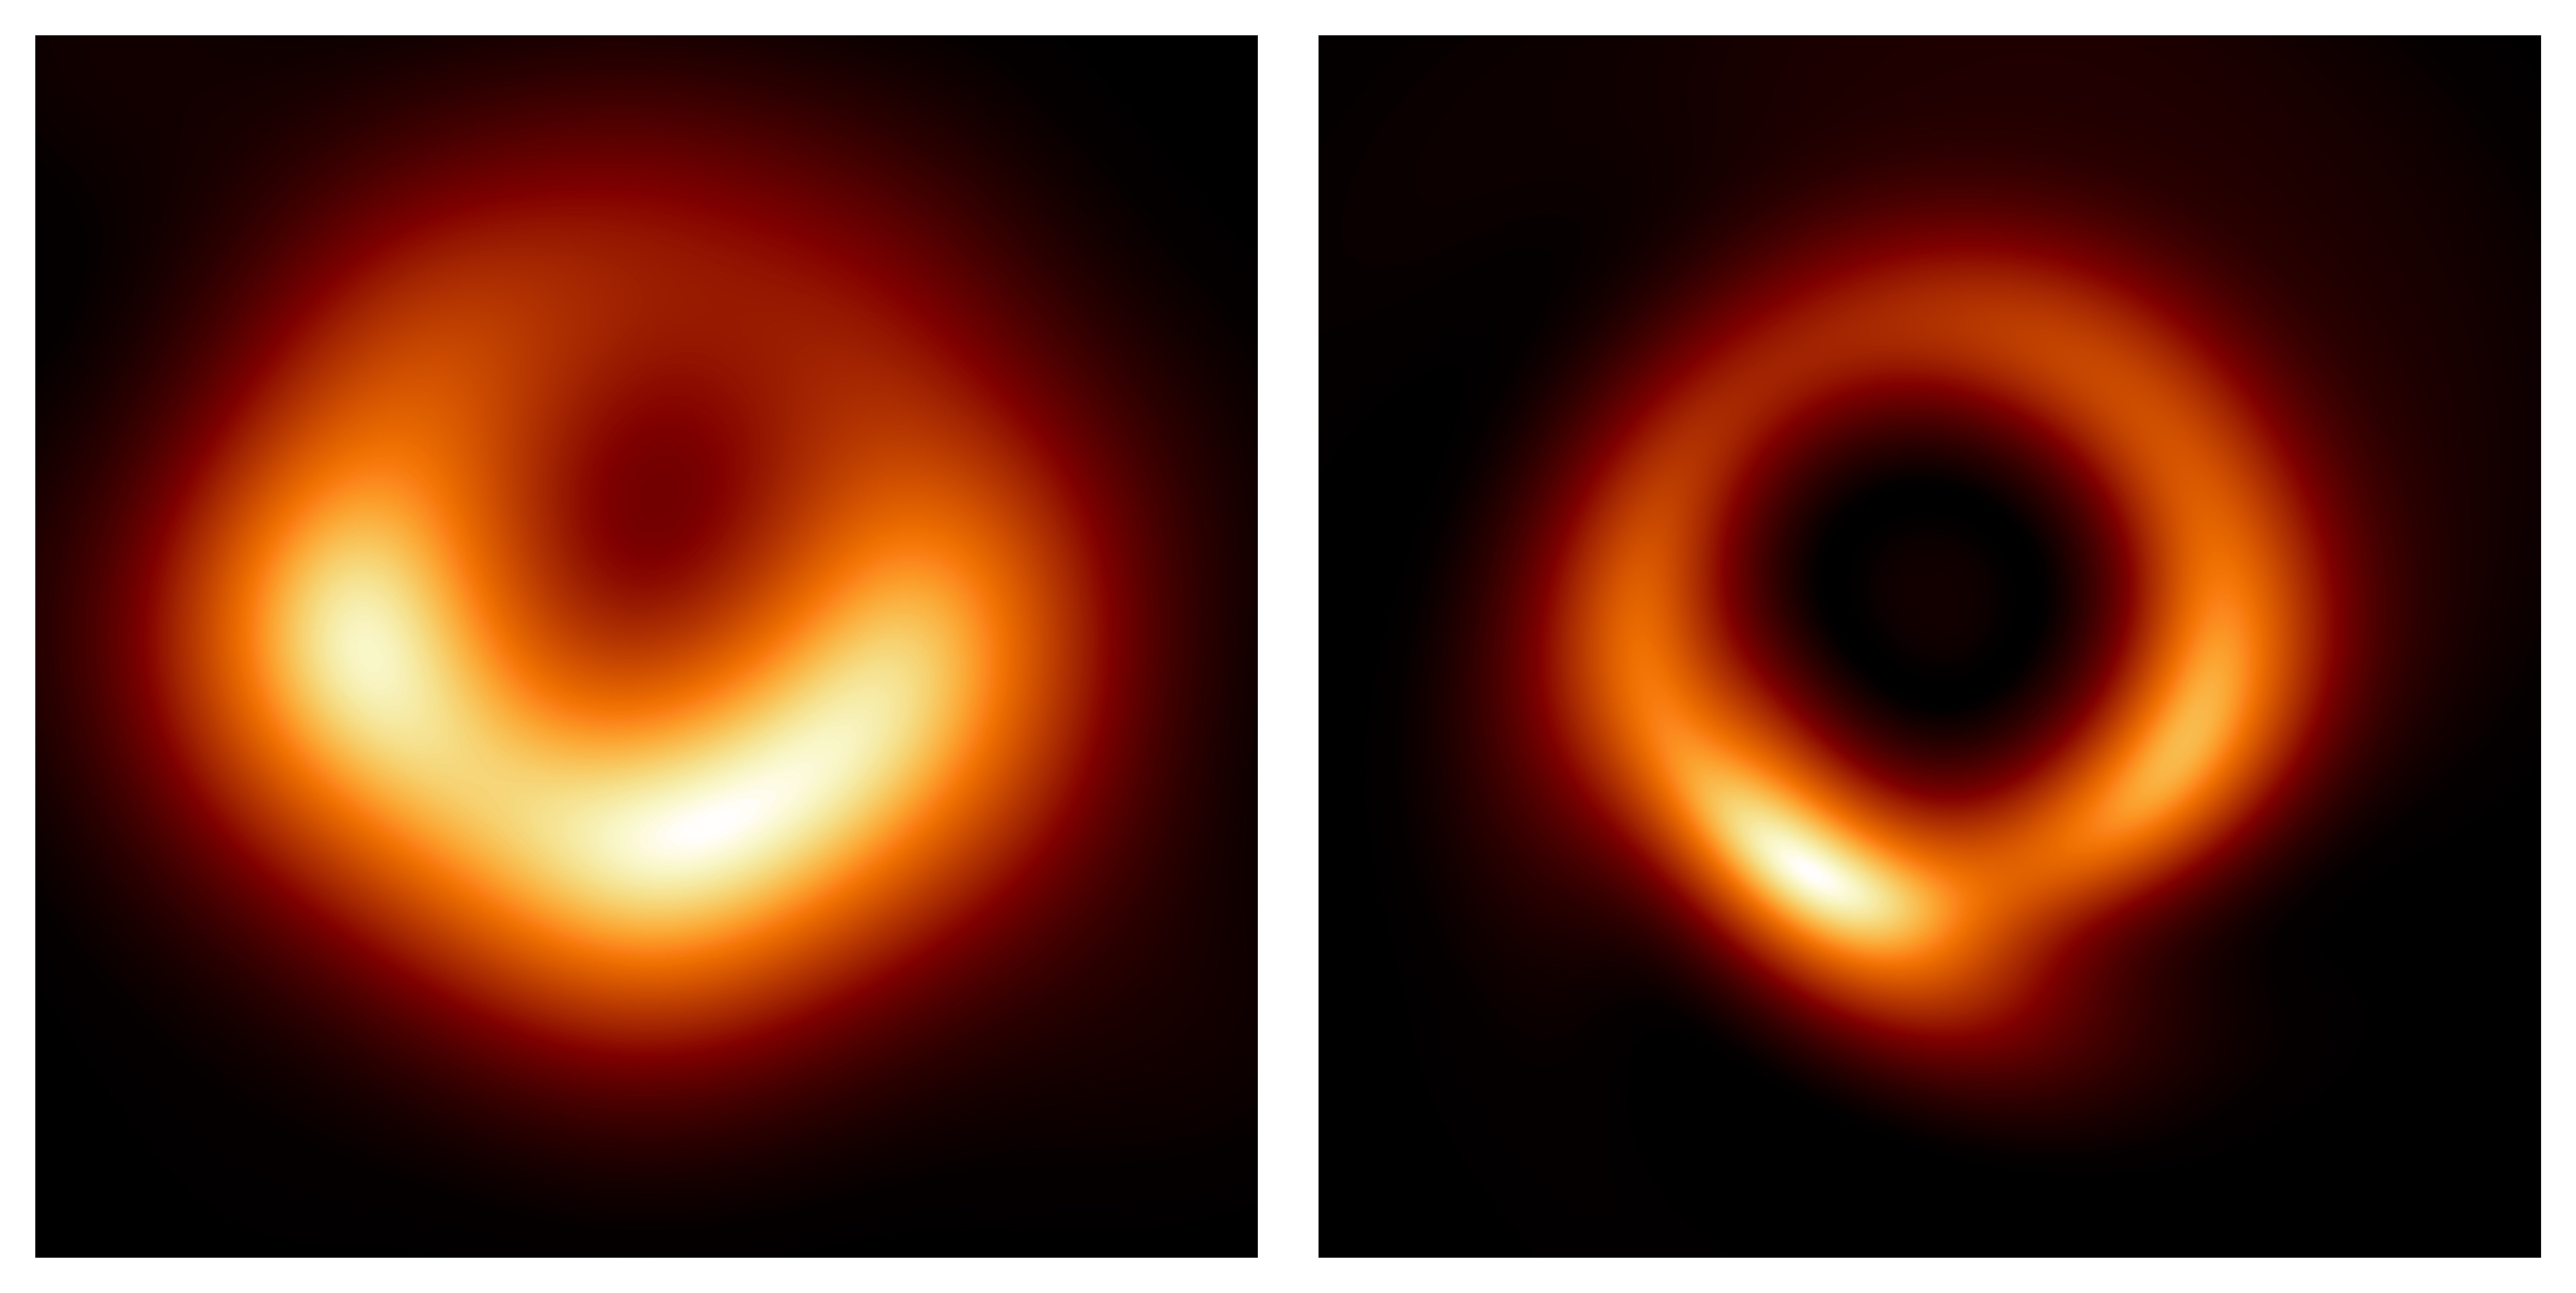 M87 supermassive black hole originally imaged by the EHT collaboration in 2019 (left); and new image generated by the PRIMO algorithm using the same data set (right)